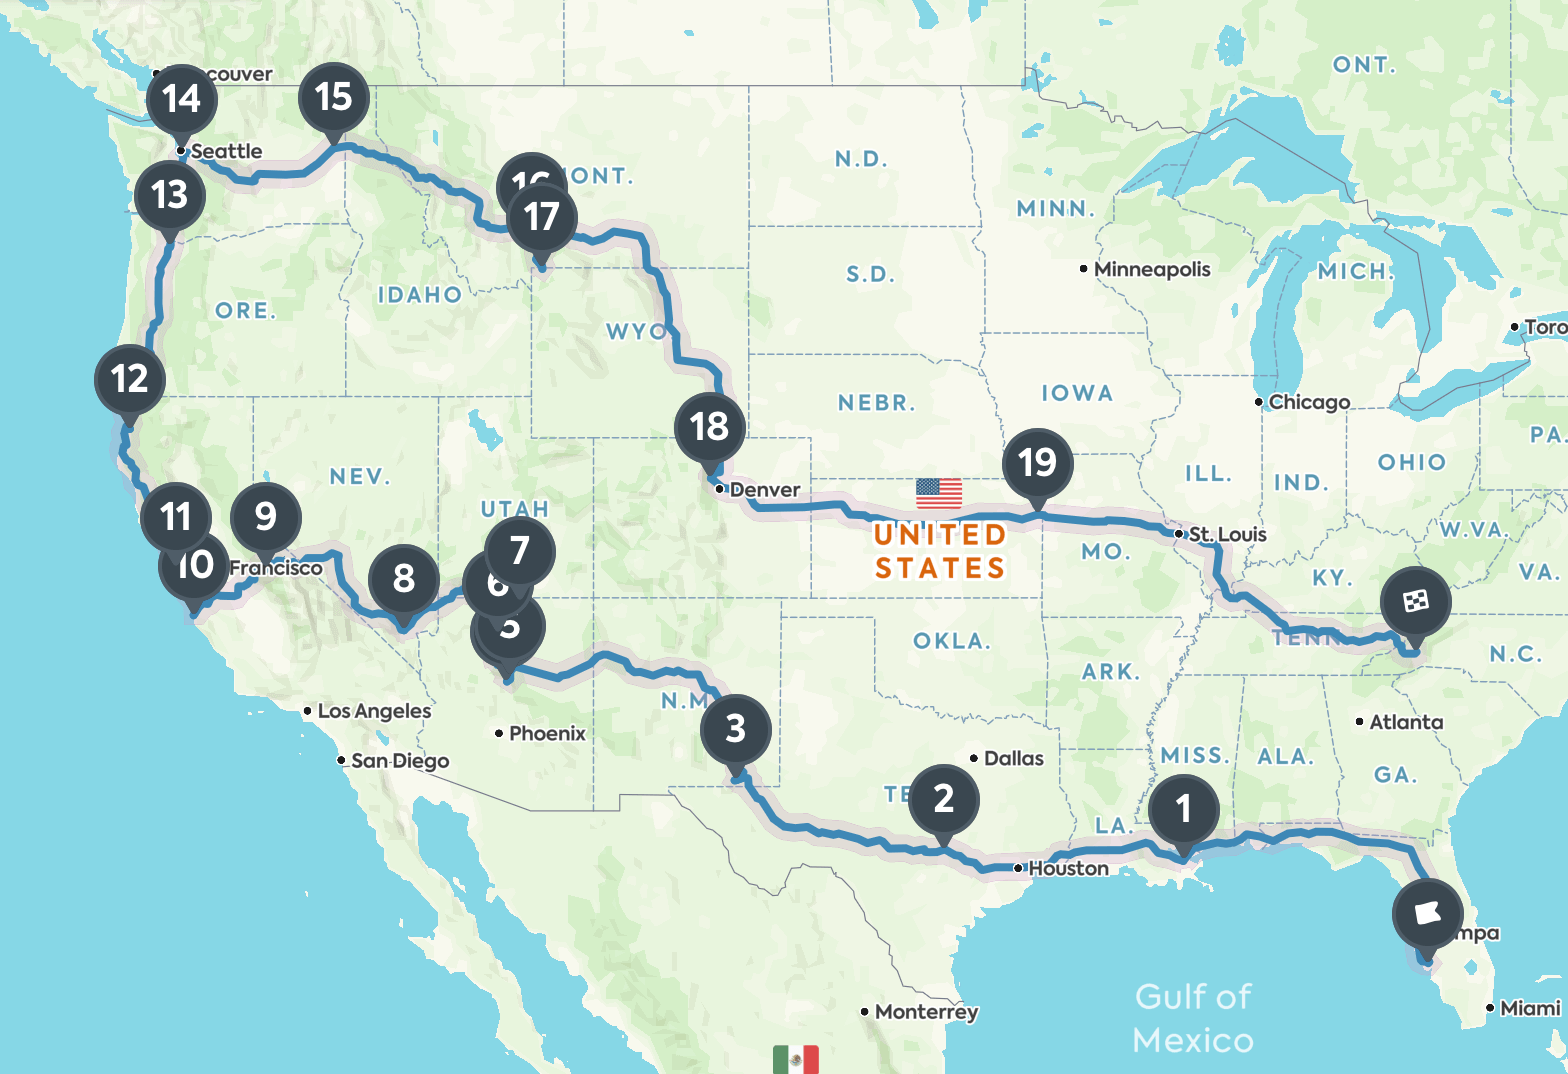 Summer 2018 Road Trip for Adventure or Bust